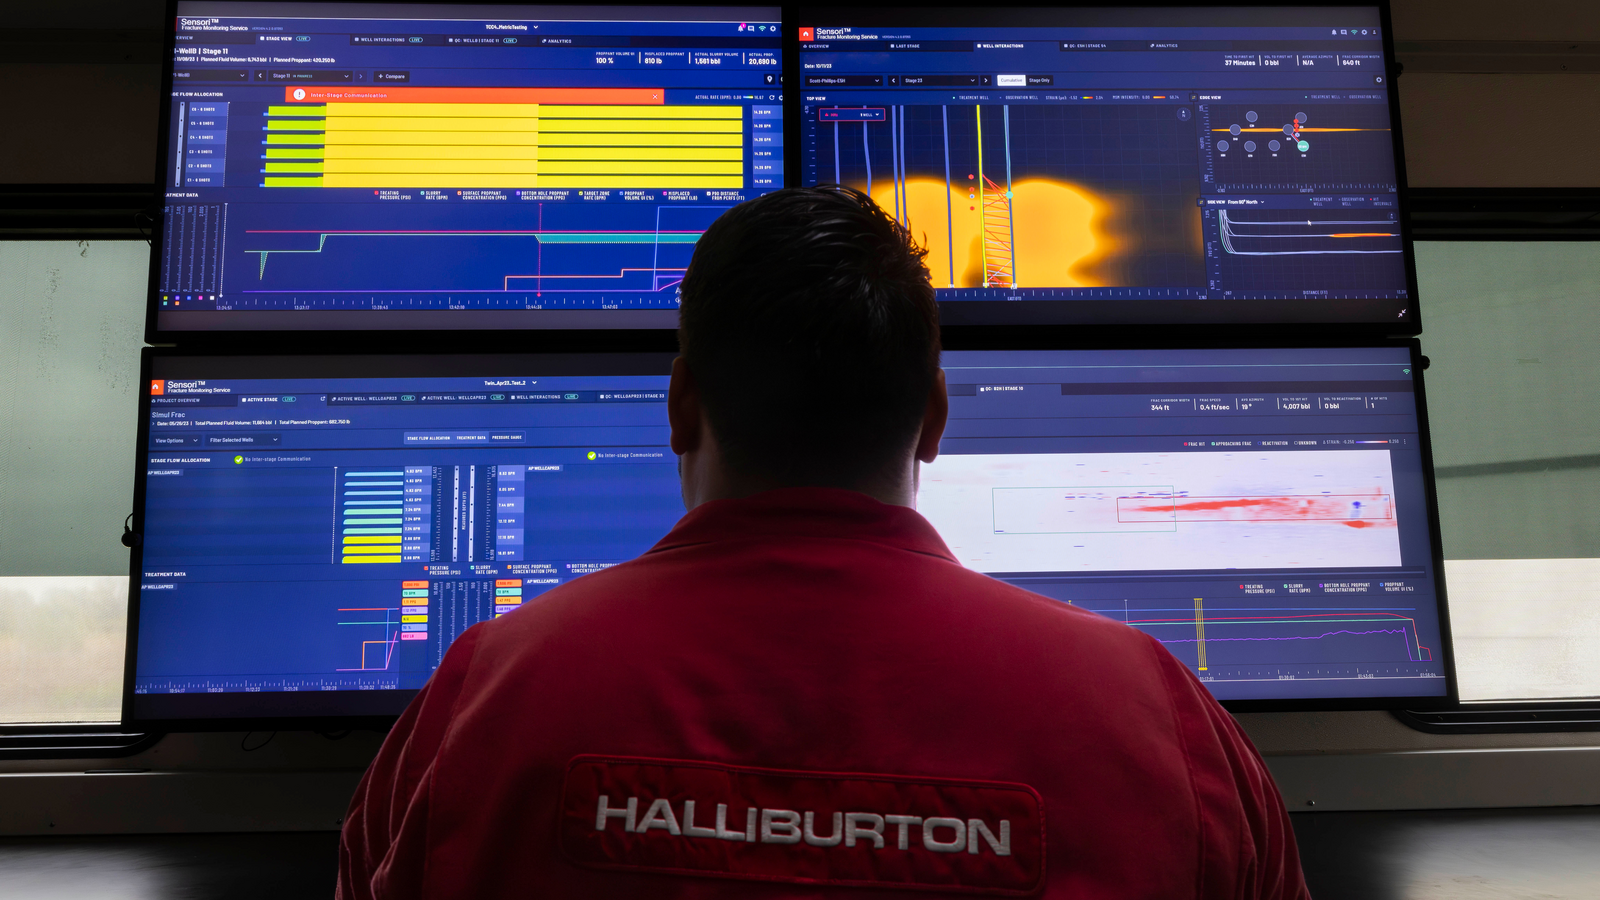 A Halliburton employee working with the Sensori fracture monitoring system through multiple display screens.